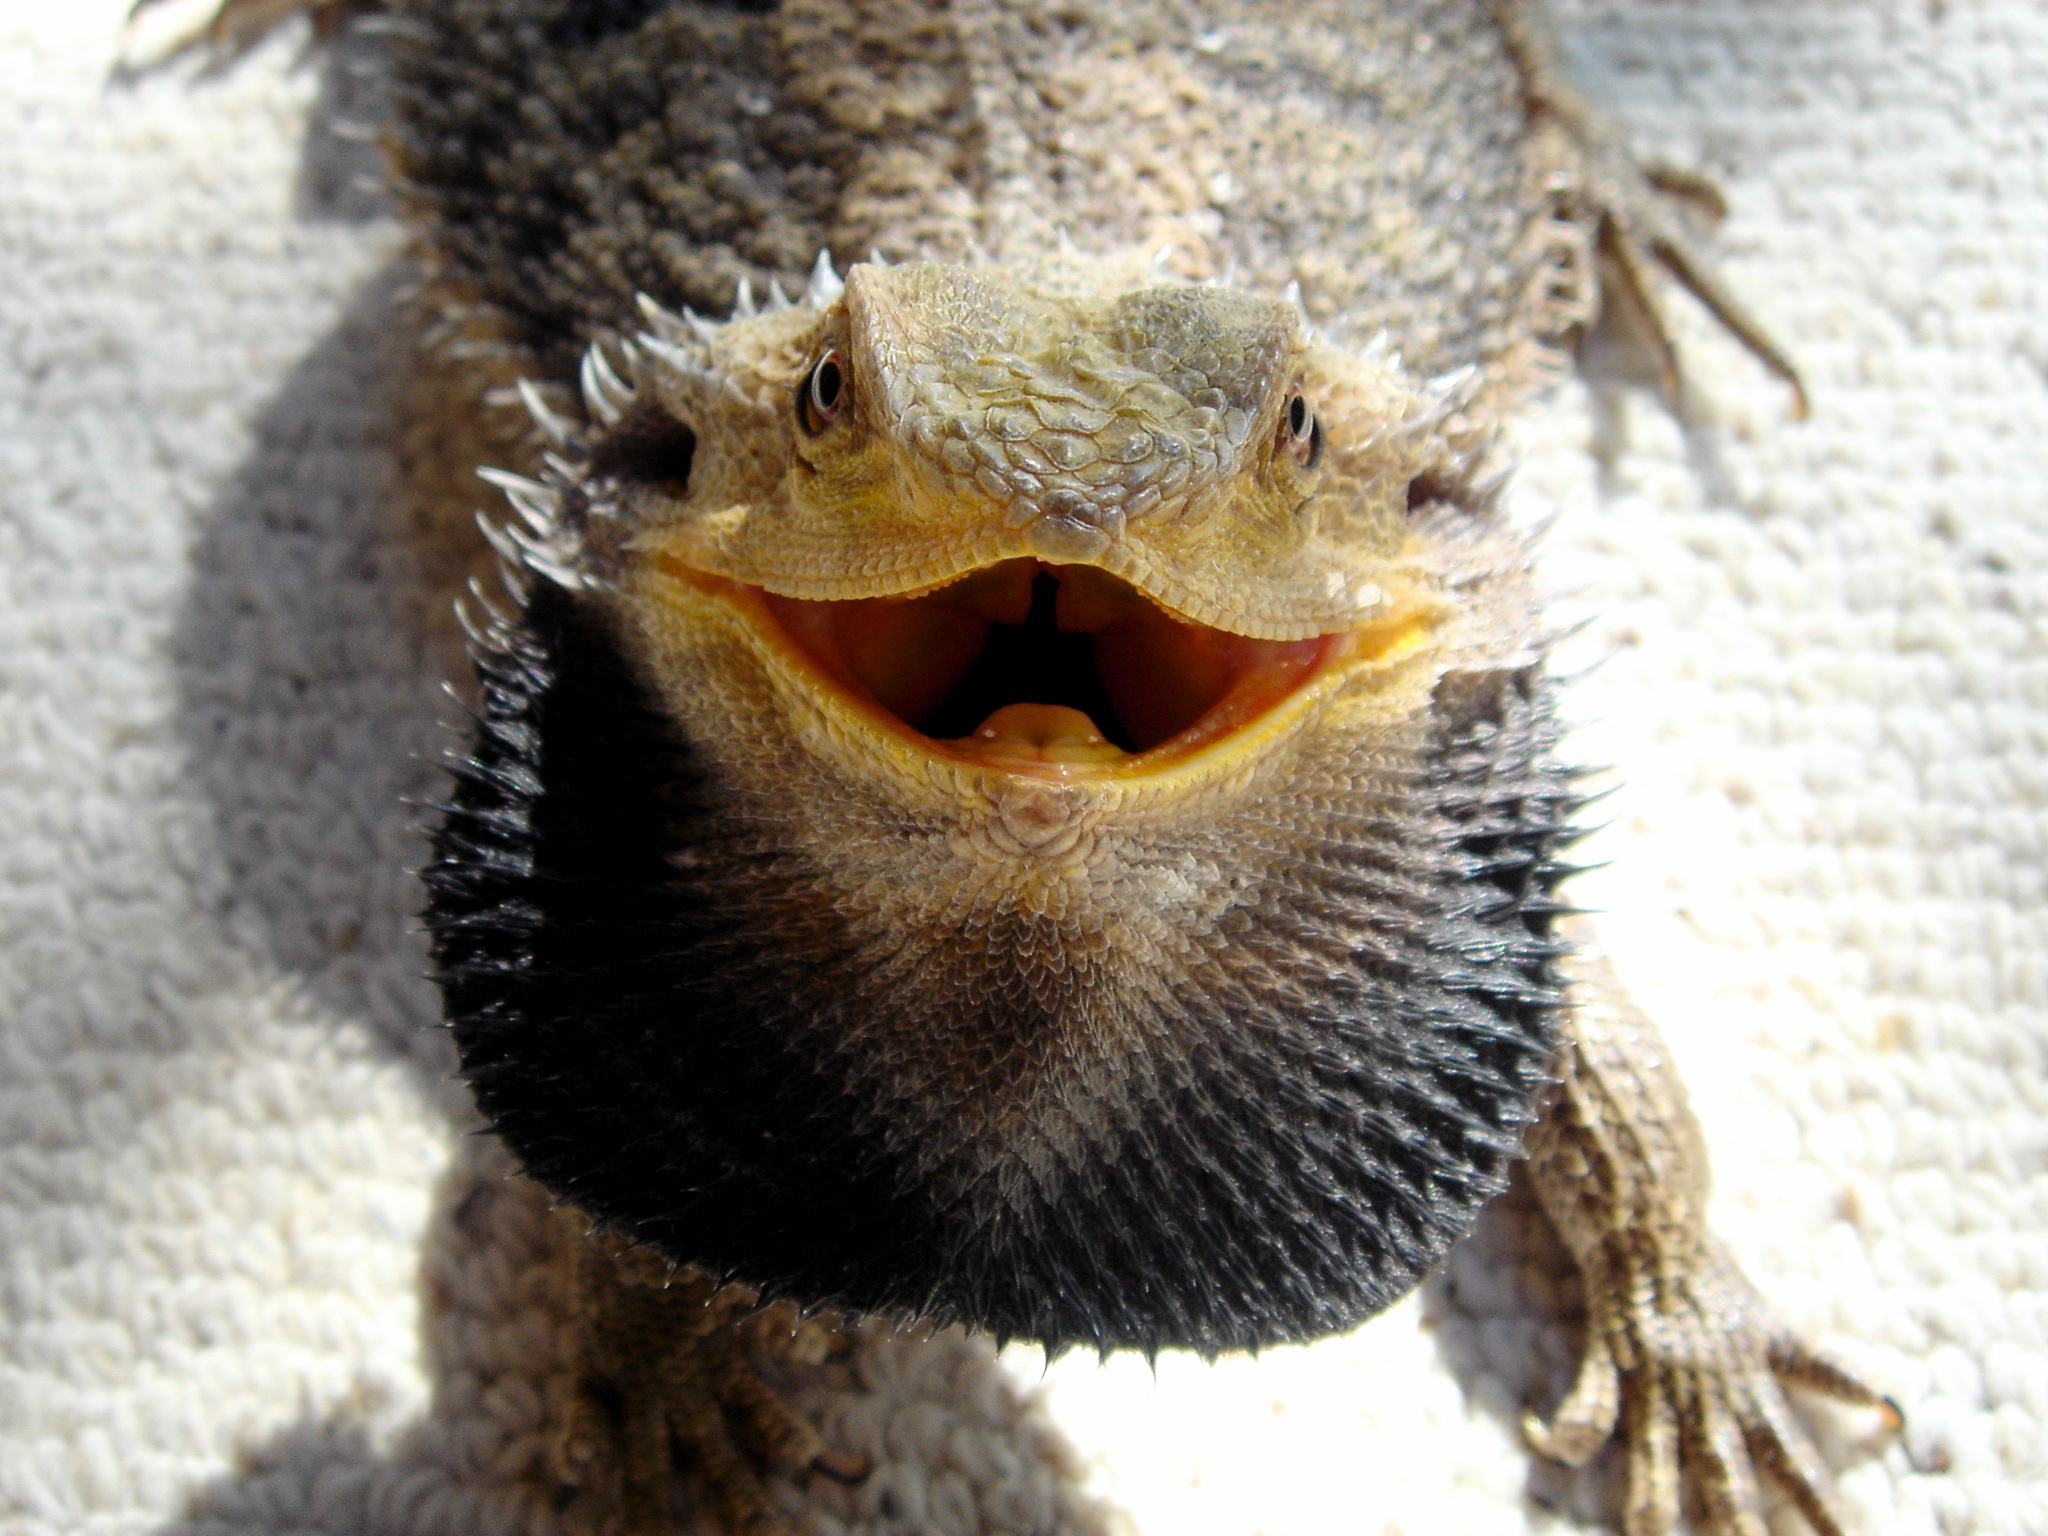 Bearded Dragon showing beard.jpg. d:Special:EntityPage/Q125191. d:Special:E...